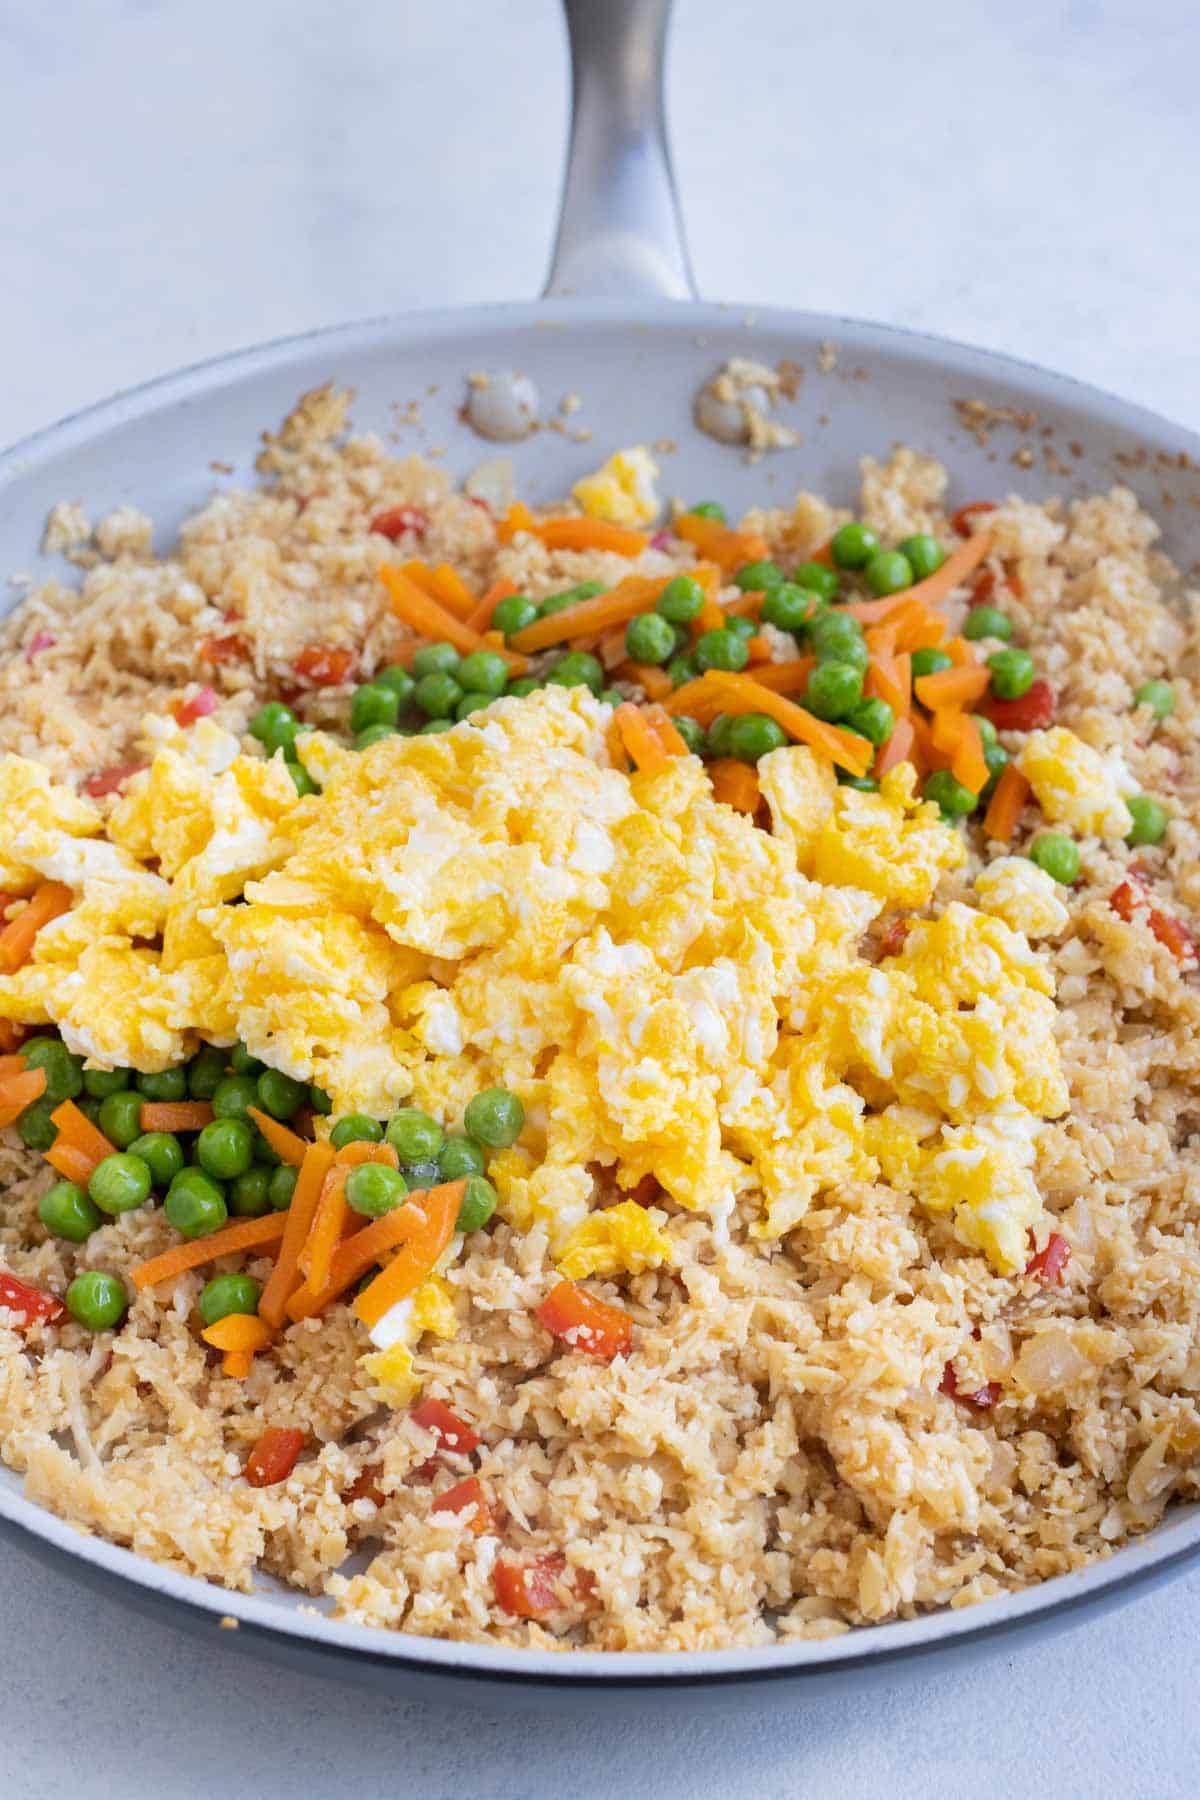 Scrambled eggs and thawed veggies are added back to the riced cauliflower.